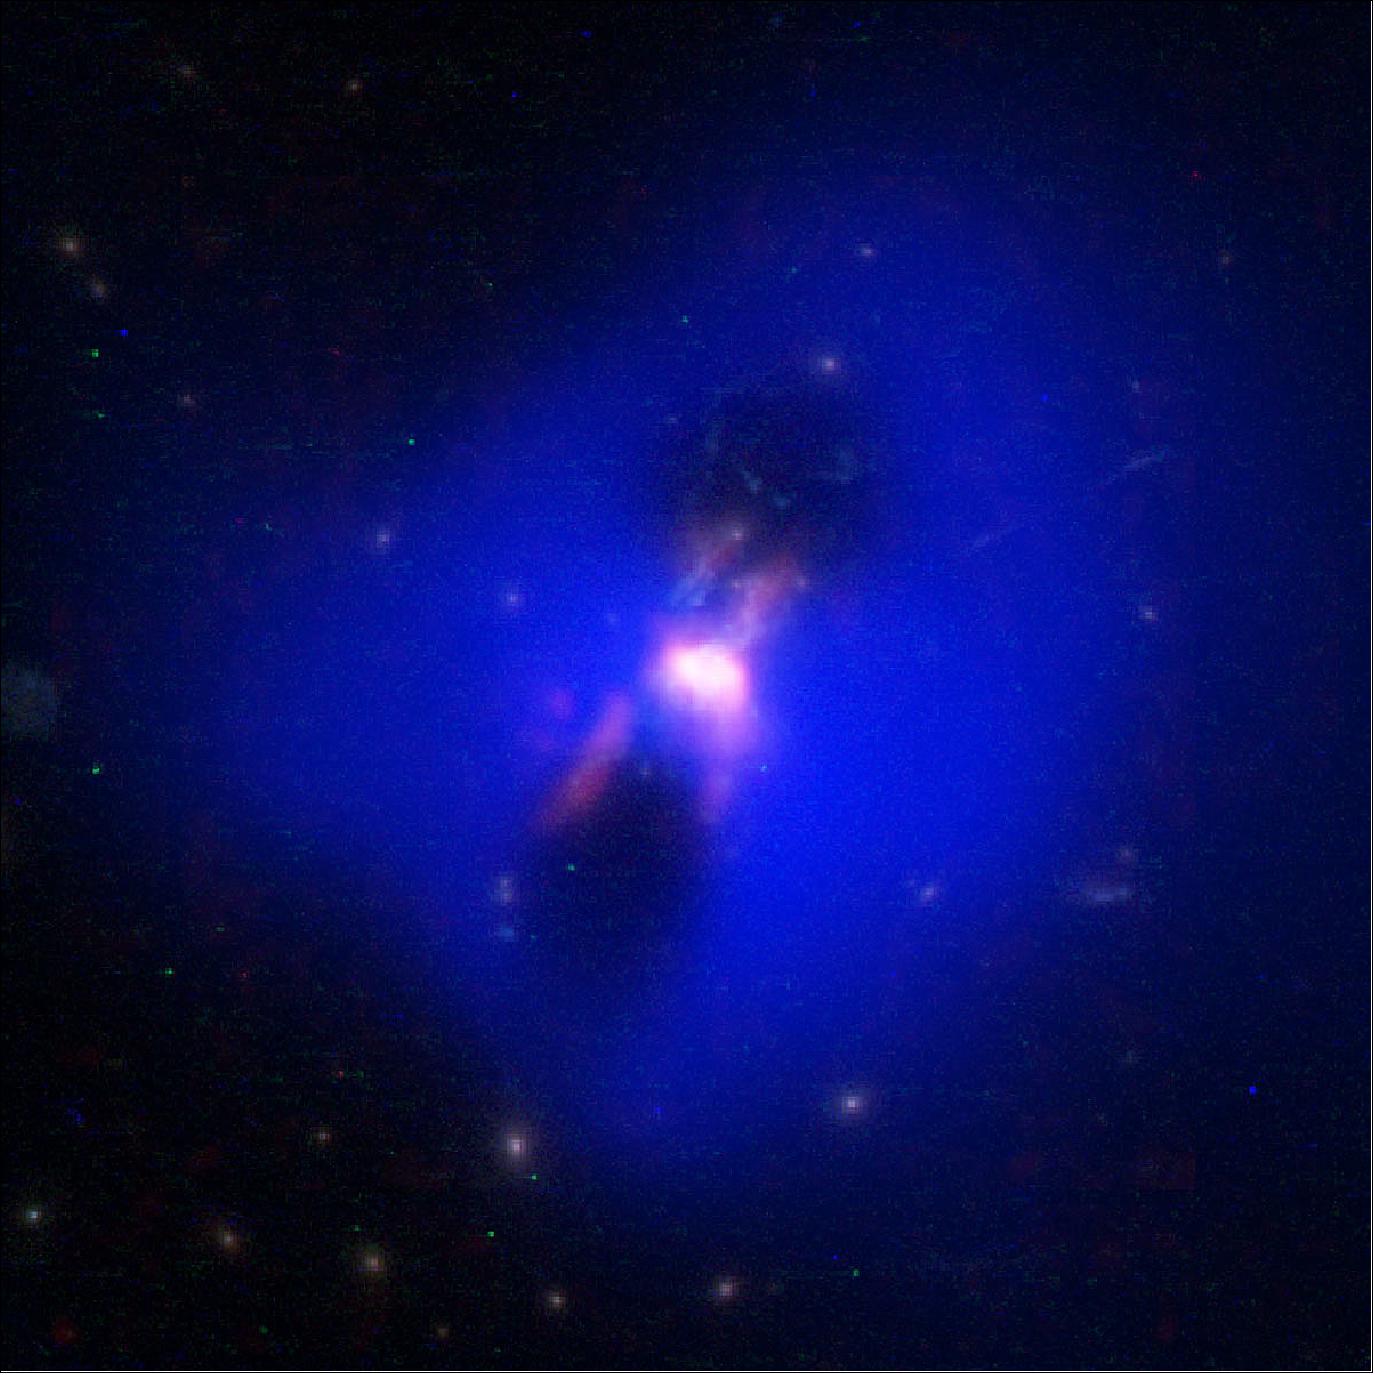 Figure 38: Composite image showing how powerful radio jets from the supermassive black hole at the center of a galaxy in the Phoenix Cluster inflated huge "bubbles" in the hot, ionized gas surrounding the galaxy (the cavities inside the blue region imaged by NASA's Chandra X-ray observatory). Hugging the outside of these bubbles, ALMA discovered an unexpected trove of cold gas, the fuel for star formation (red). The background image is from the Hubble Space Telescope [image credit: ALMA (ESO/NAOJ/NRAO) H. Russell, et al.; NASA/ESA Hubble; NASA/CXC/MIT/M. McDonald et al.; B. Saxton (NRAO/AUI/NSF)]